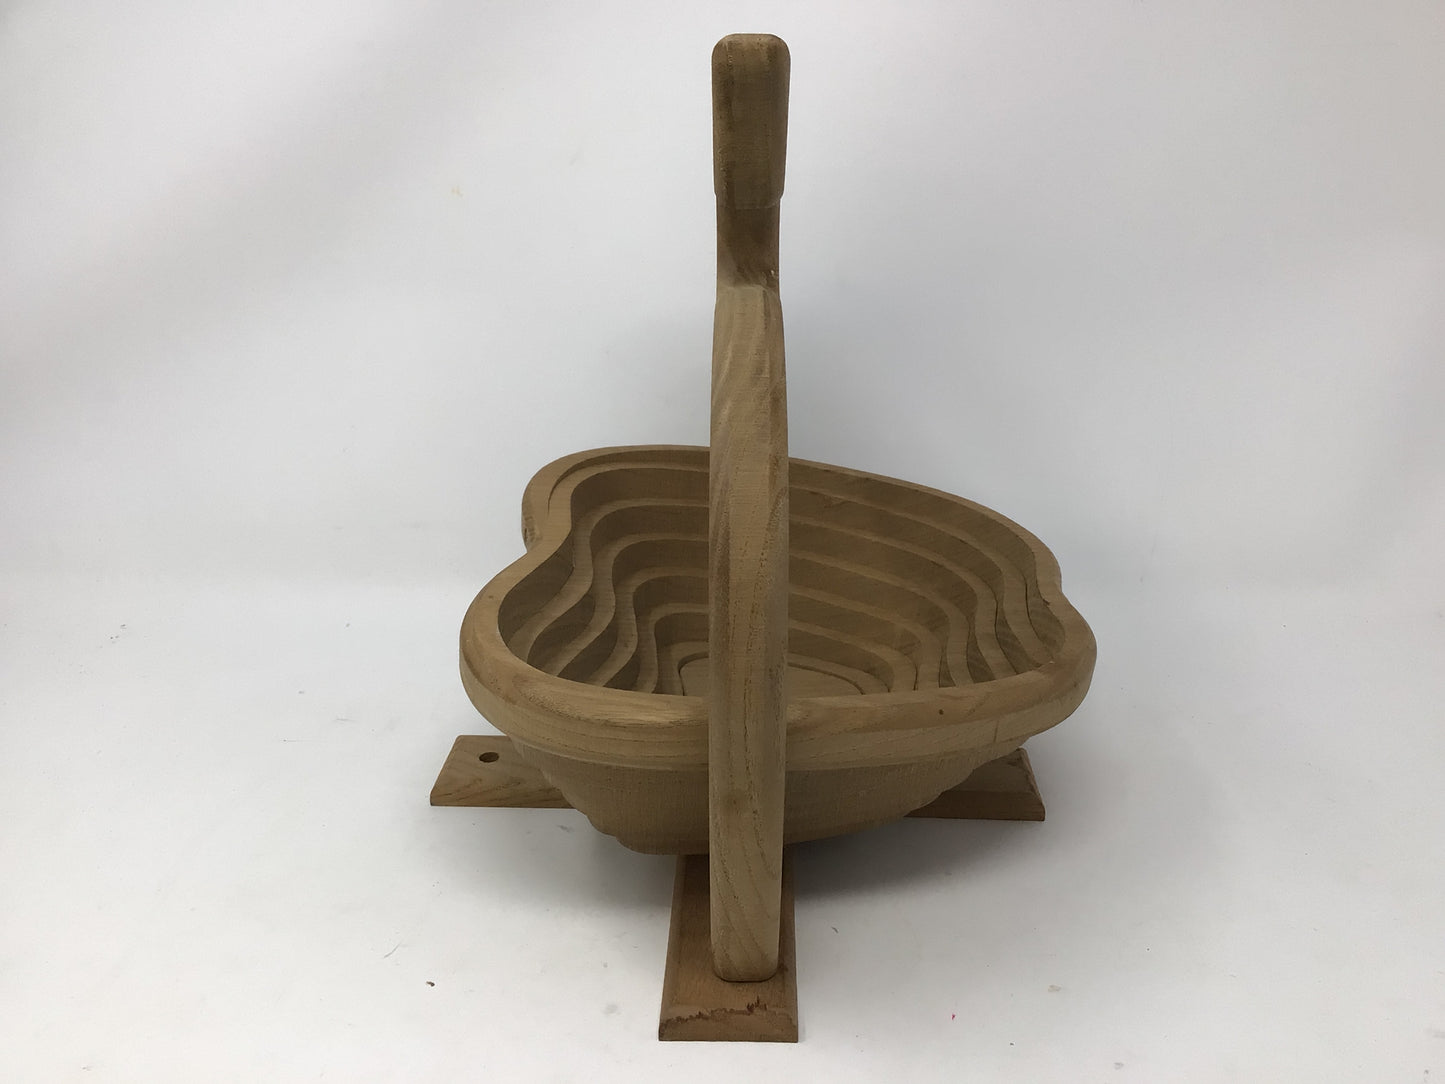 Rustic Handcrafted Collapsible Wooden Bowl